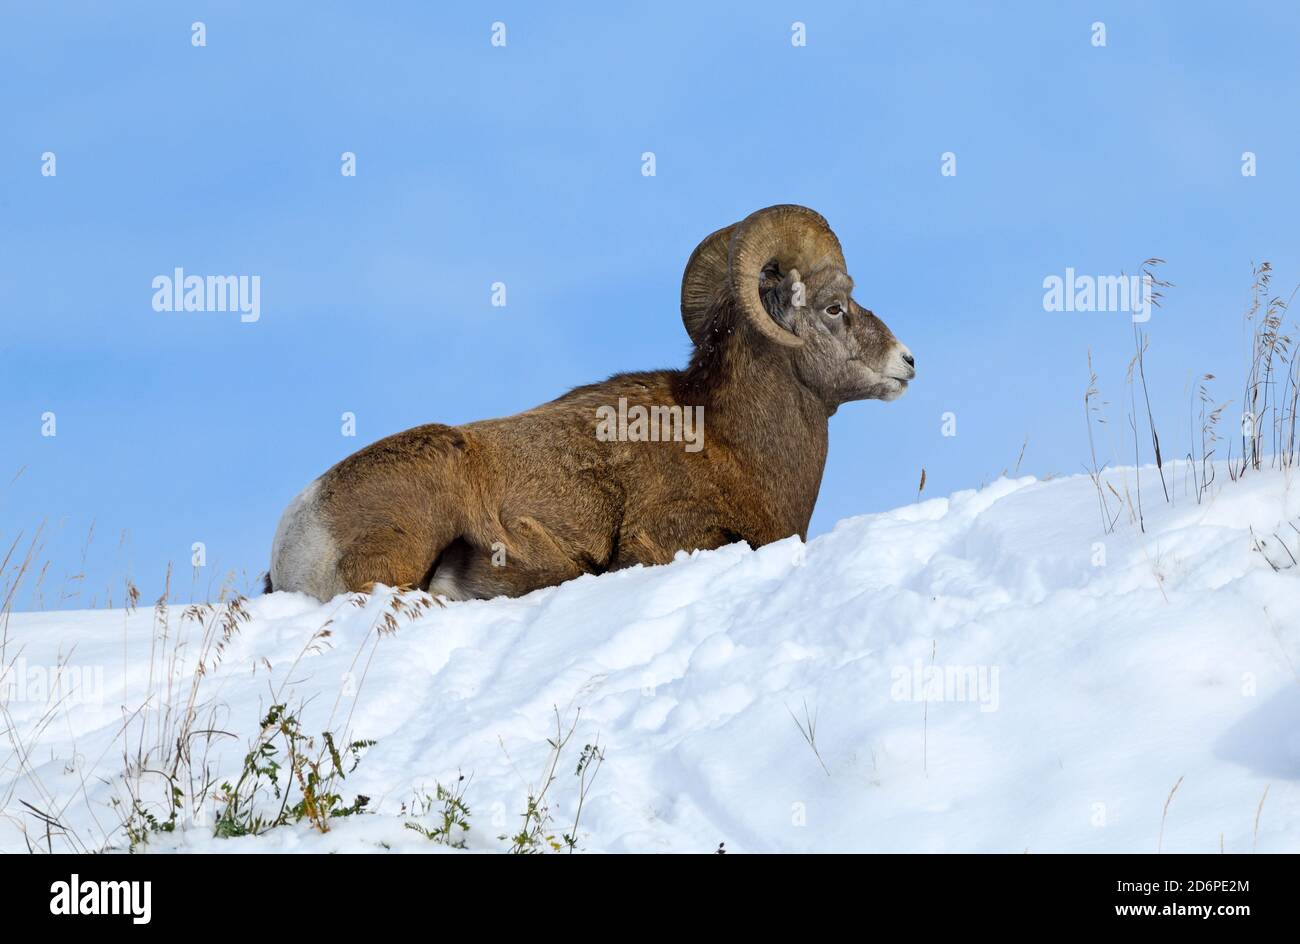 A male Bighorn Sheep 'Orvis canadensis', laying in the fresh snow at the top of a hill in the foothills of the rocky mountains in Alberta Canada Stock Photo